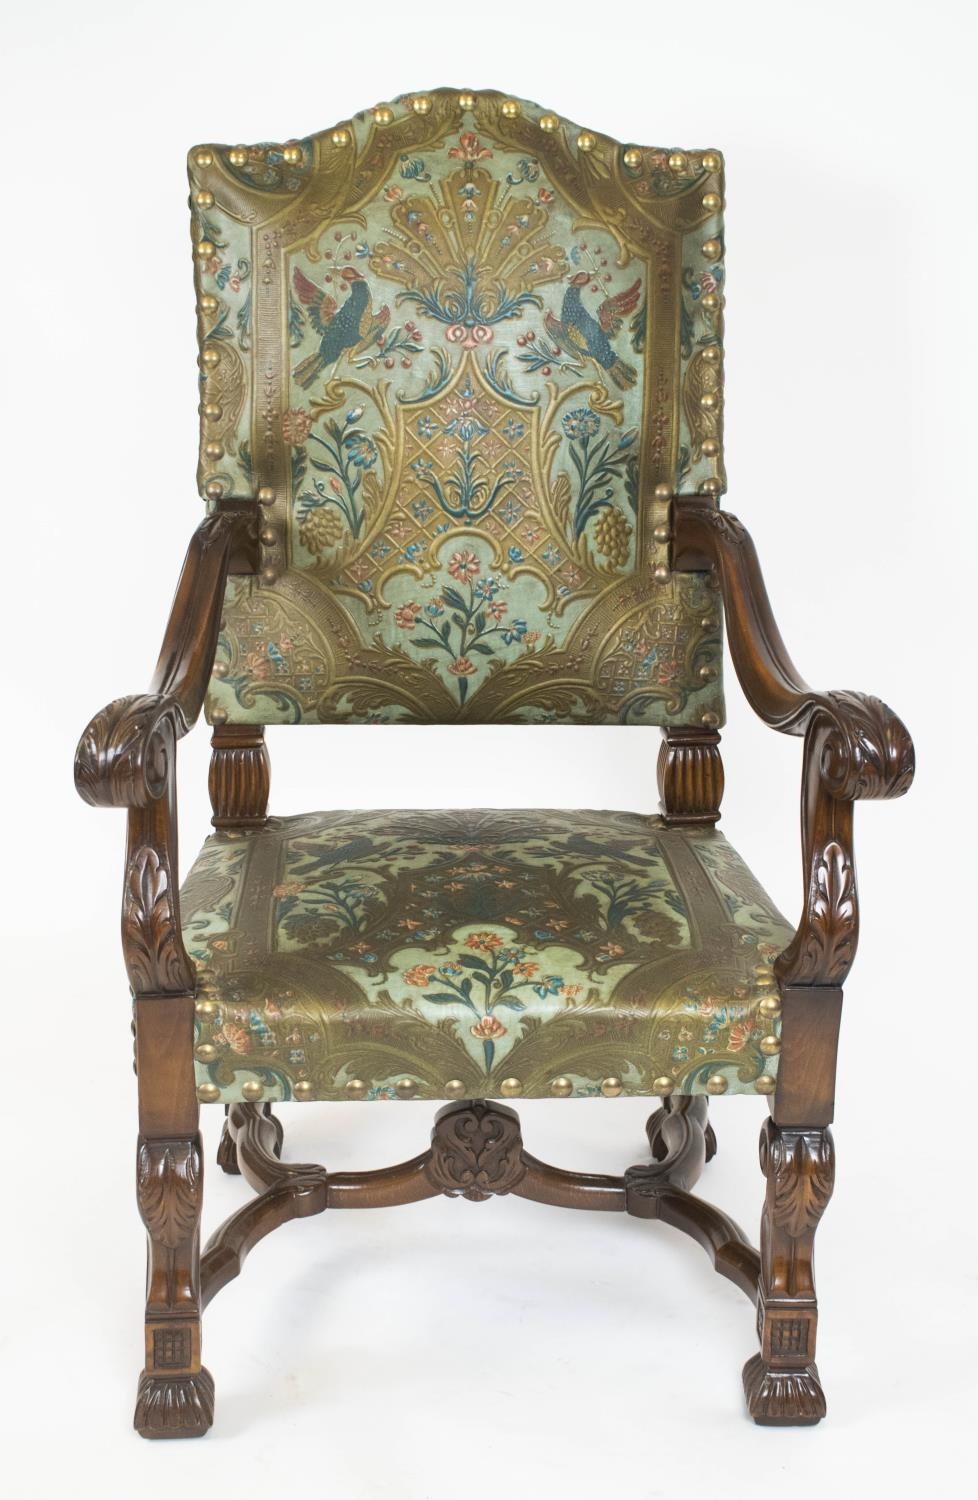 THRONE CHAIR, 121cm H x 72cm W x 70cm D, Louis XIV style in polychrome embossed leather. - Image 2 of 5